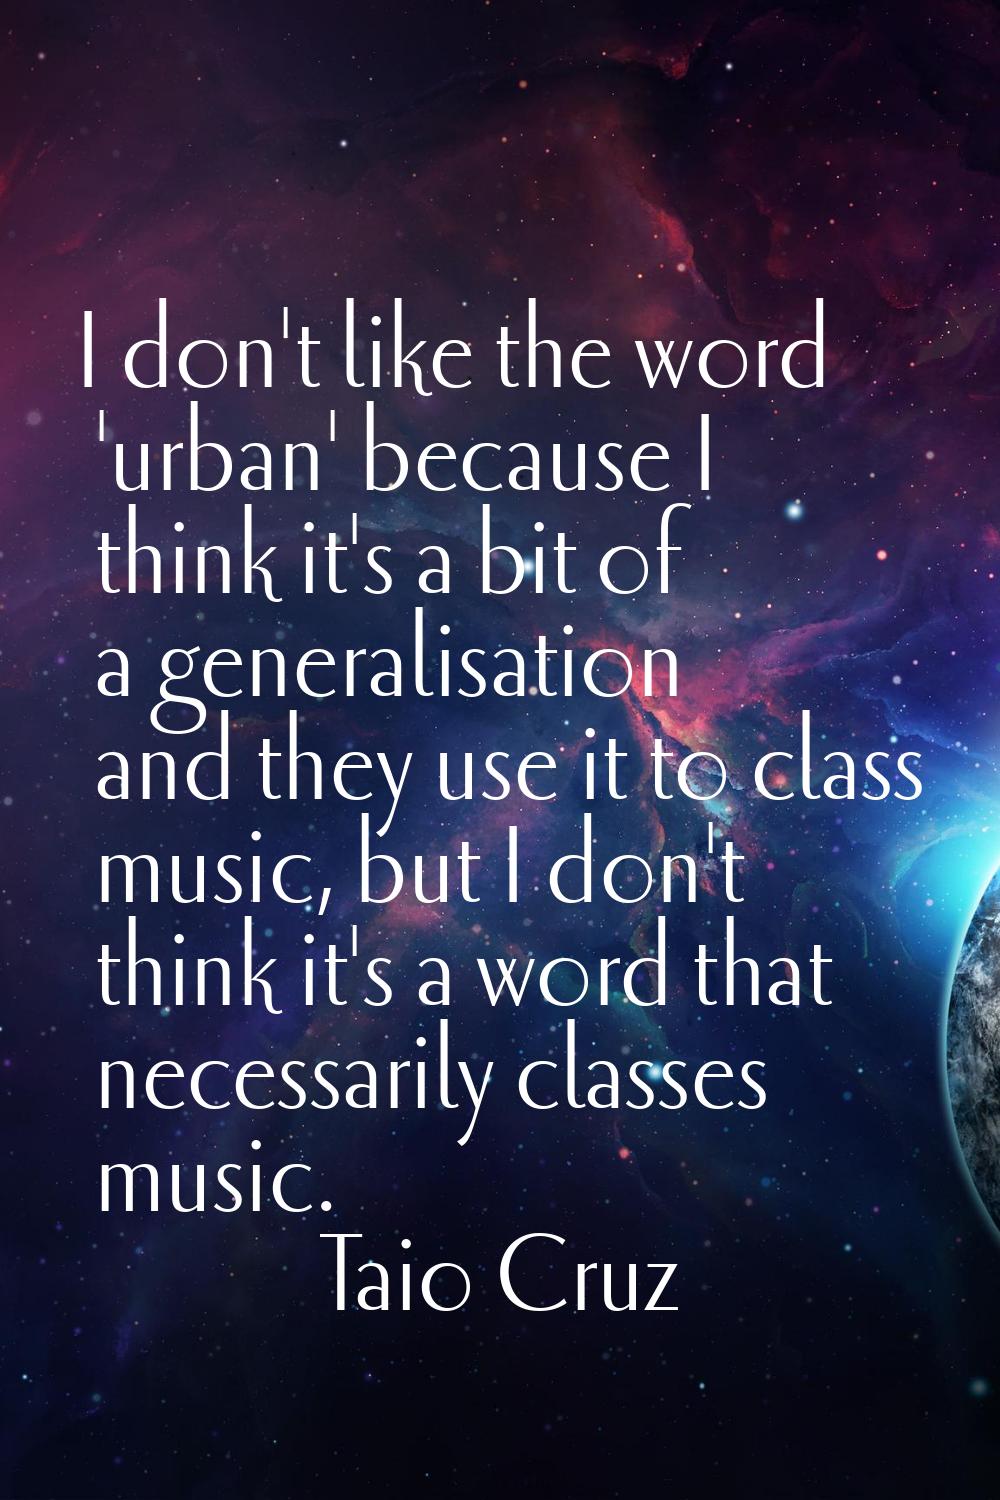 I don't like the word 'urban' because I think it's a bit of a generalisation and they use it to cla